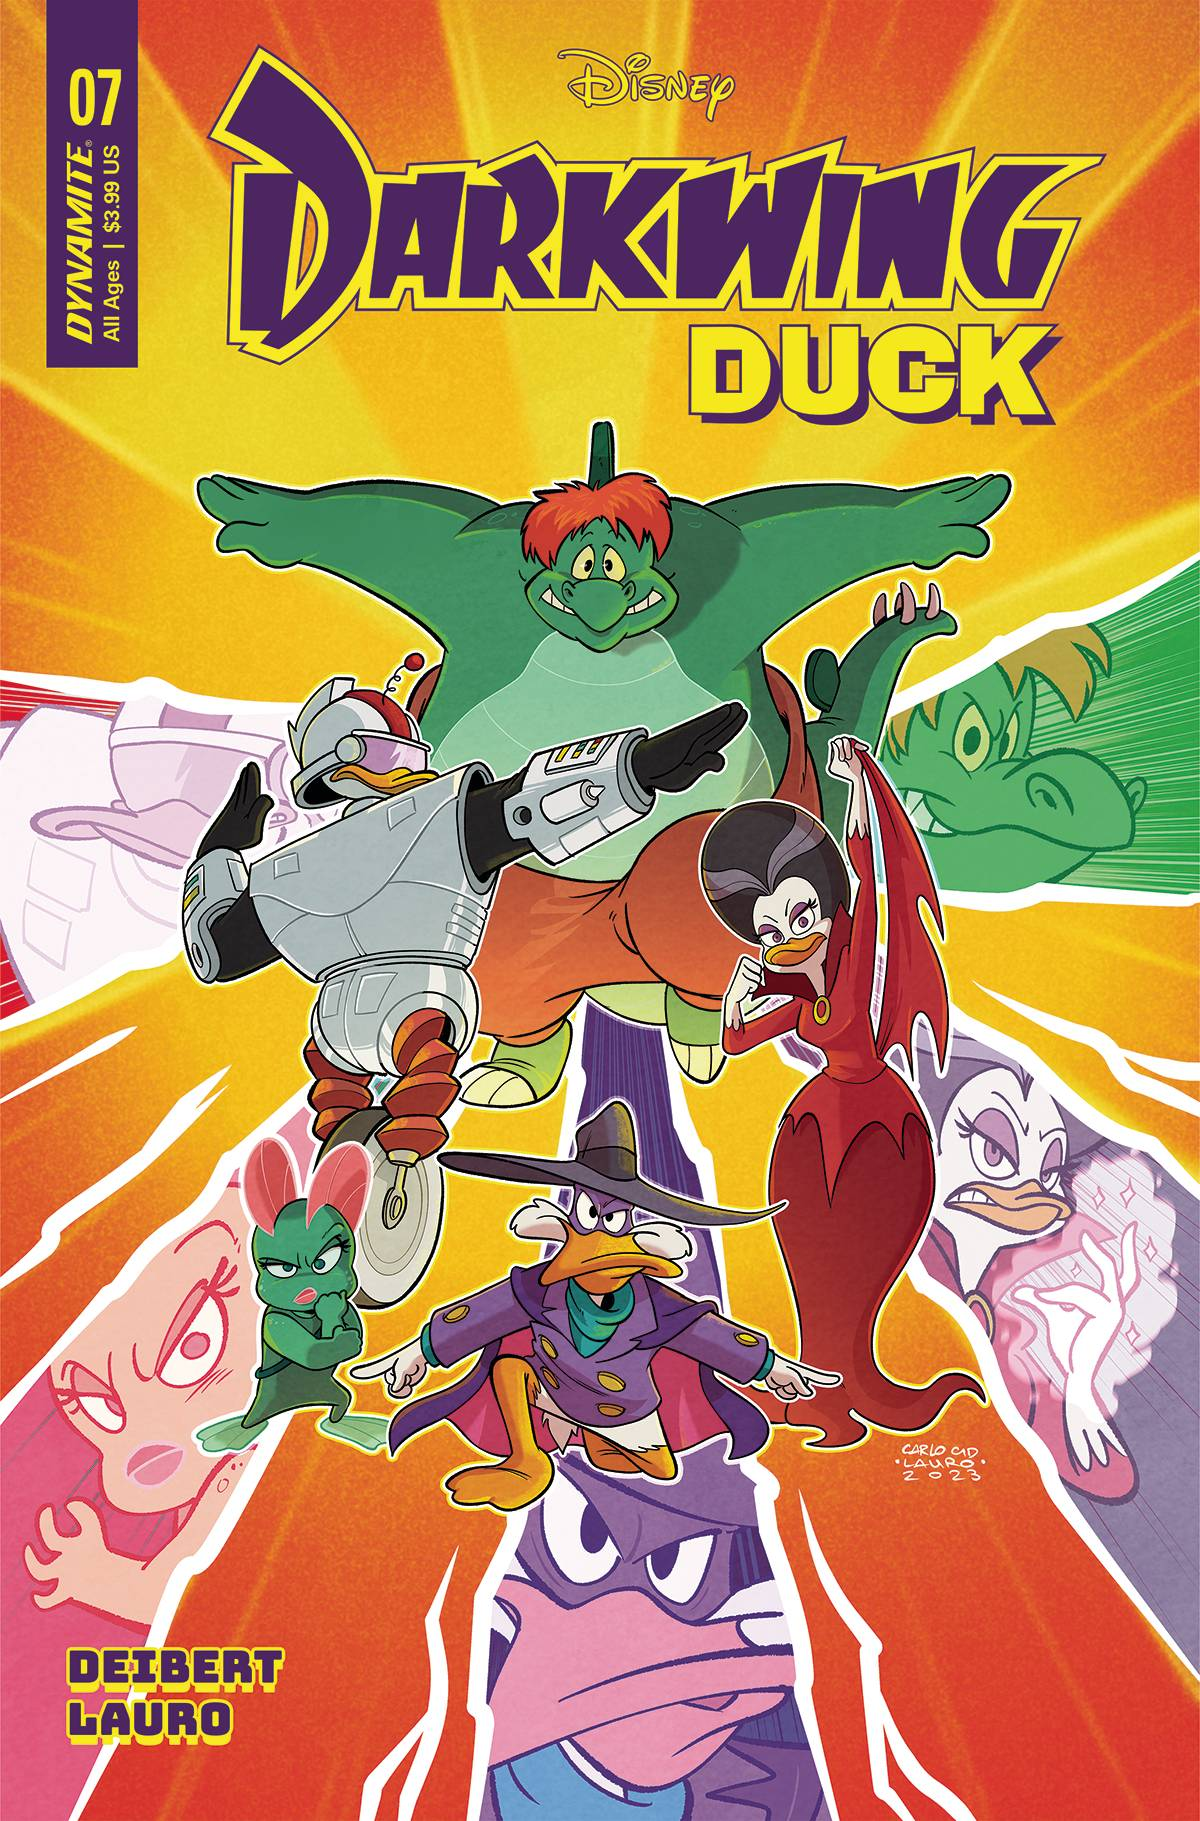 Darkwing Duck #7 Cover F 1 for 10 Incentive Lauro Original